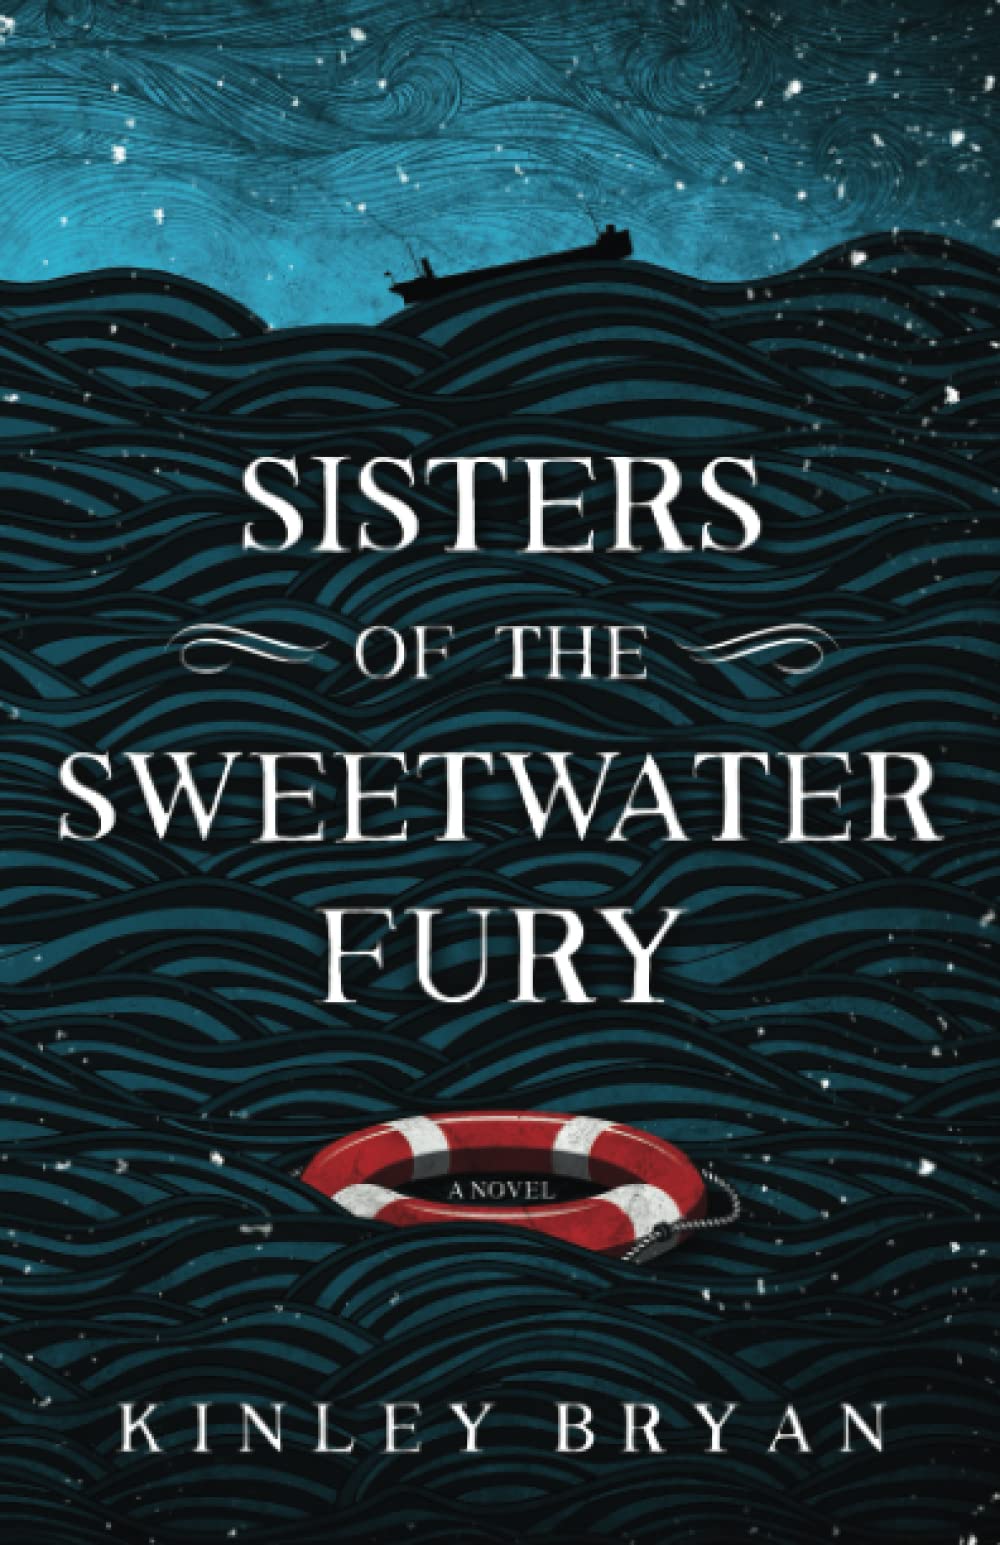 Sisters of the Sweetwater Fury by Kinley Bryan